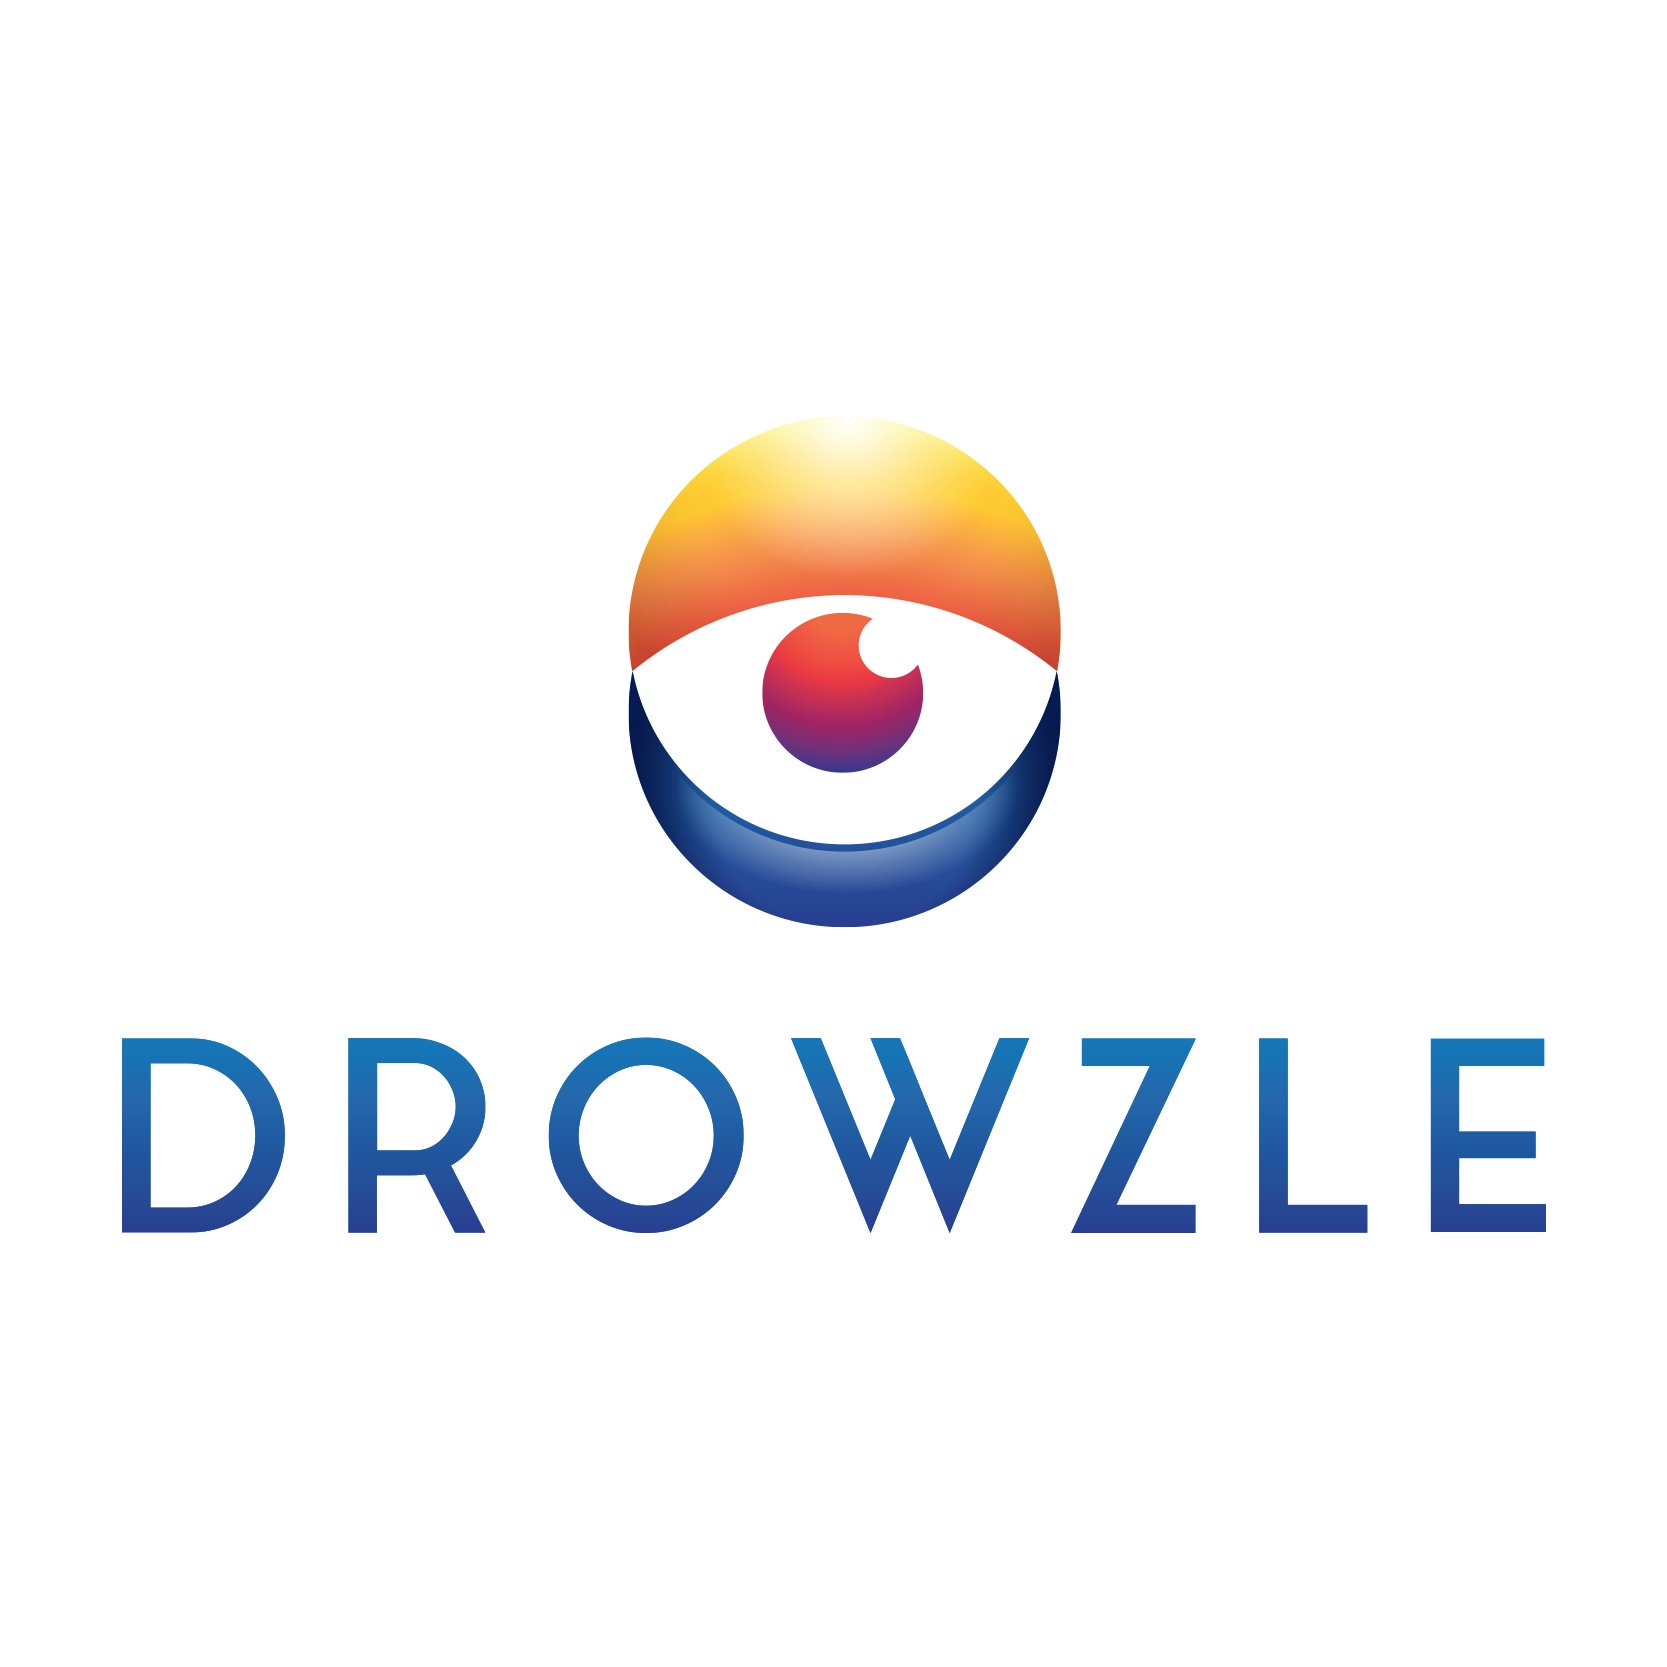 DROWZLE provides a new standard for understanding sleep breathing and its long-term impact on people’s health and quality of life.